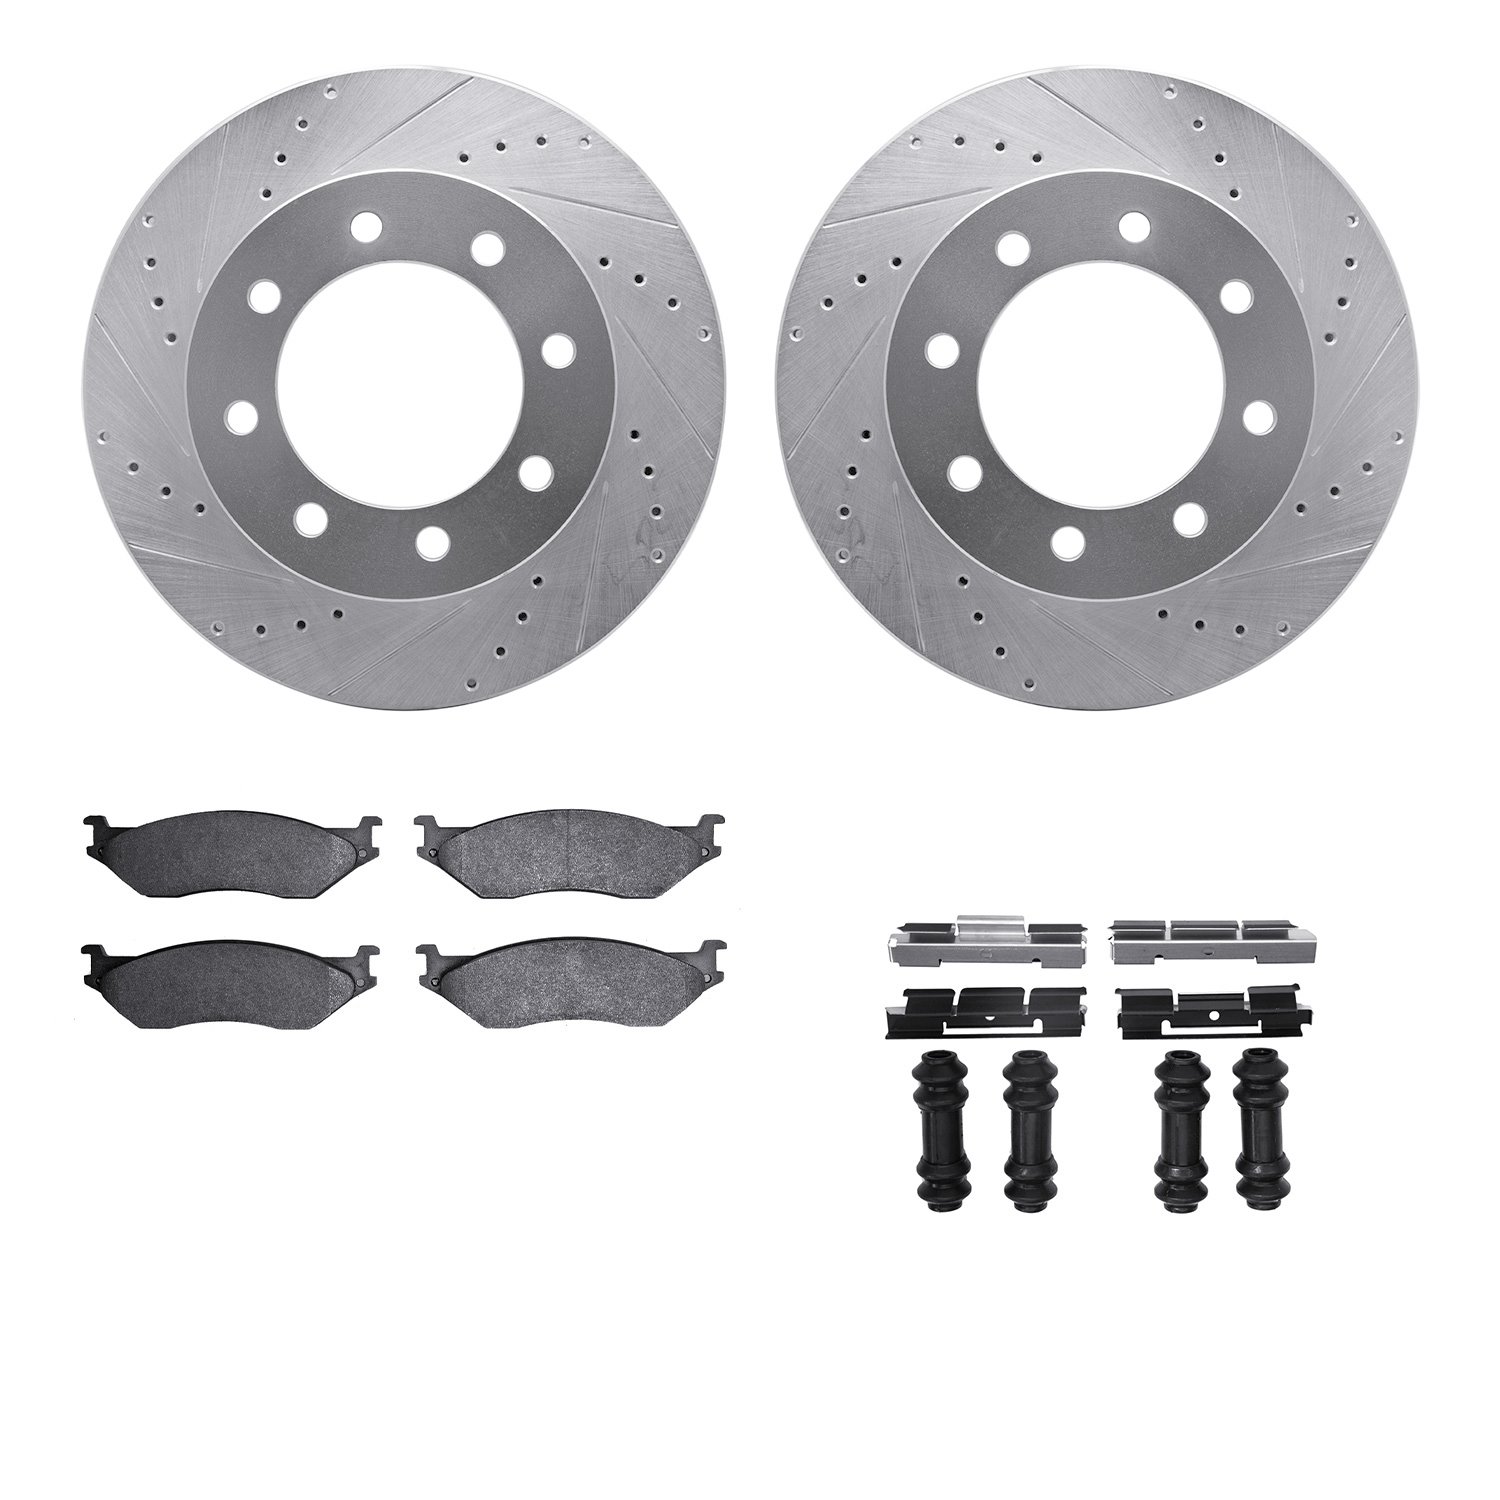 7412-54063 Drilled/Slotted Brake Rotors with Ultimate-Duty Brake Pads Kit & Hardware [Silver], 1999-2005 Ford/Lincoln/Mercury/Ma